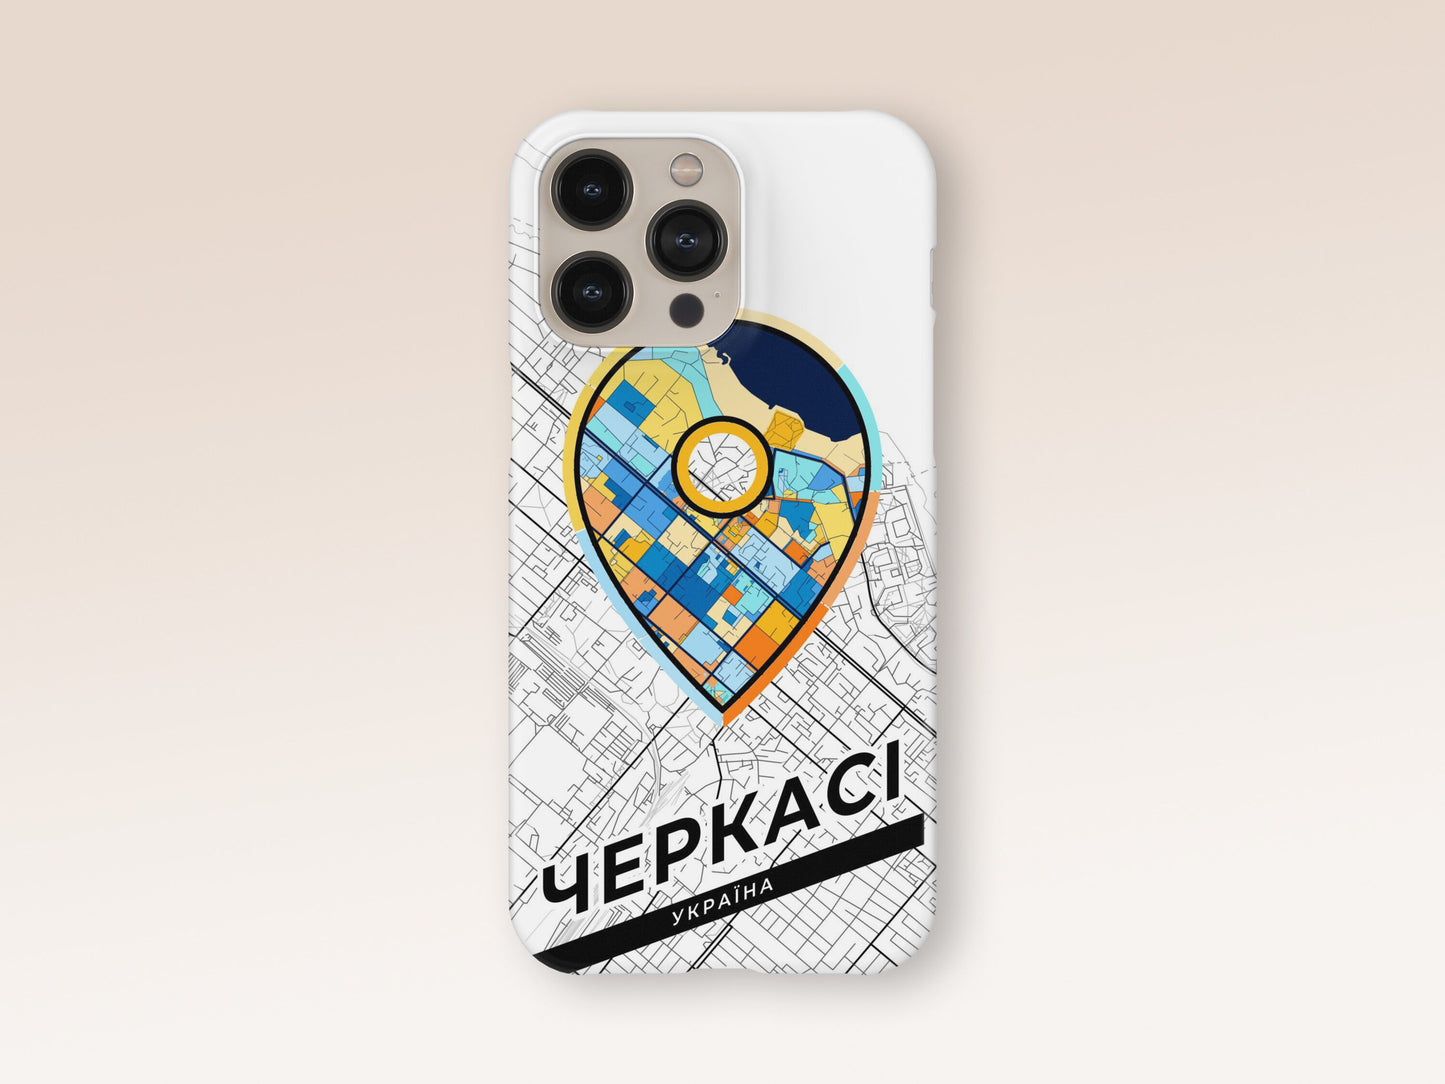 Cherkasy Ukraine slim phone case with colorful icon. Birthday, wedding or housewarming gift. Couple match cases. 1